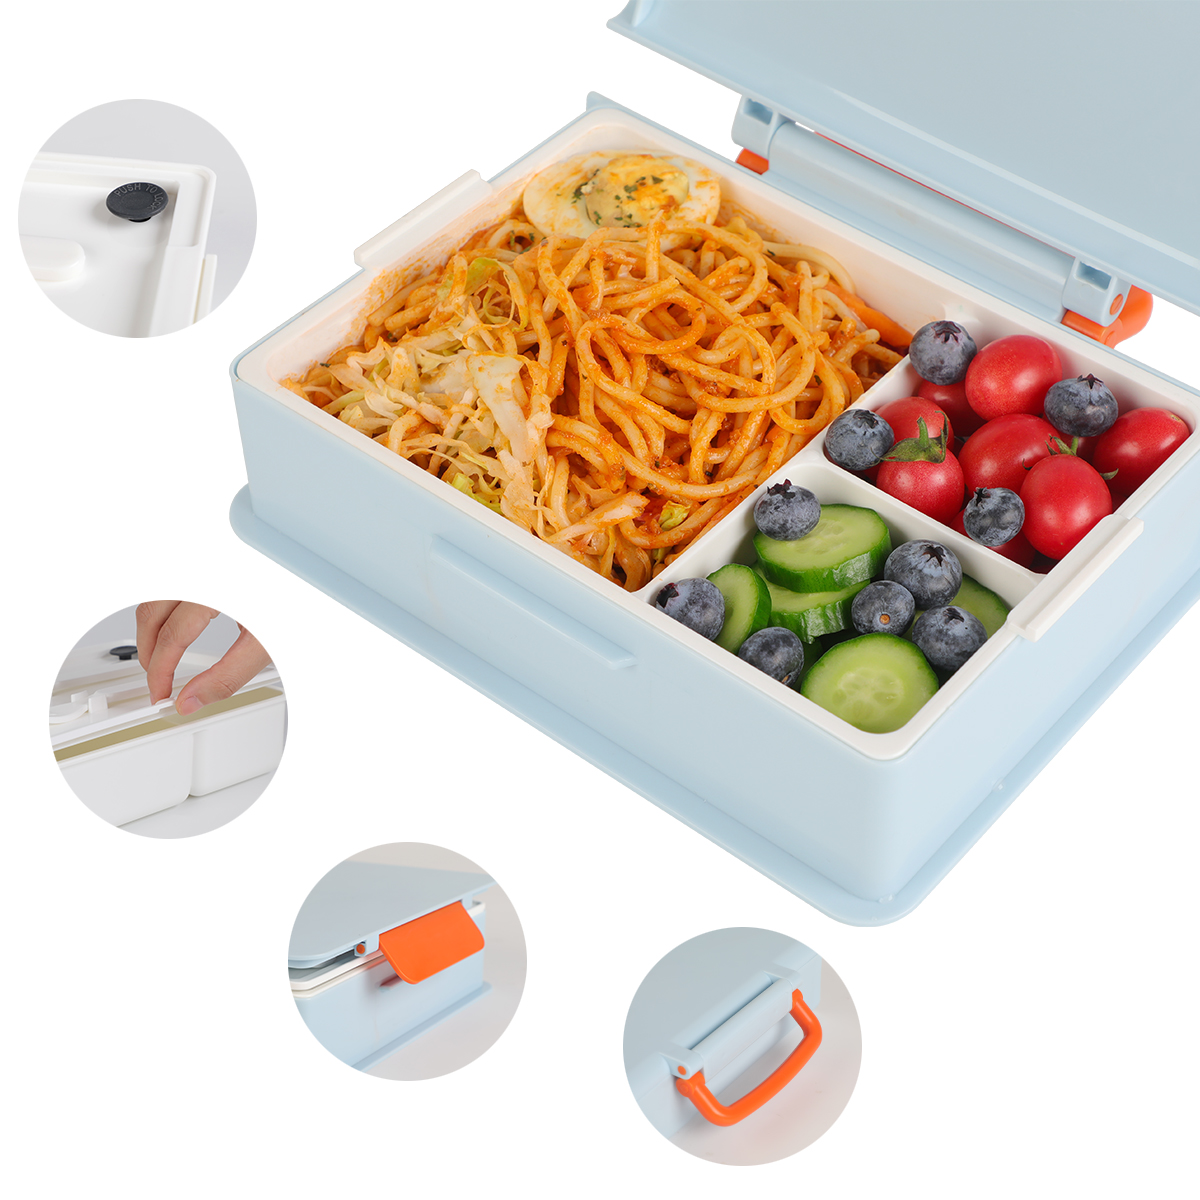 100% New Design 3 Compartment Lunch Box For Kids And Adults With Handle, Microwave Safe And BPA Free